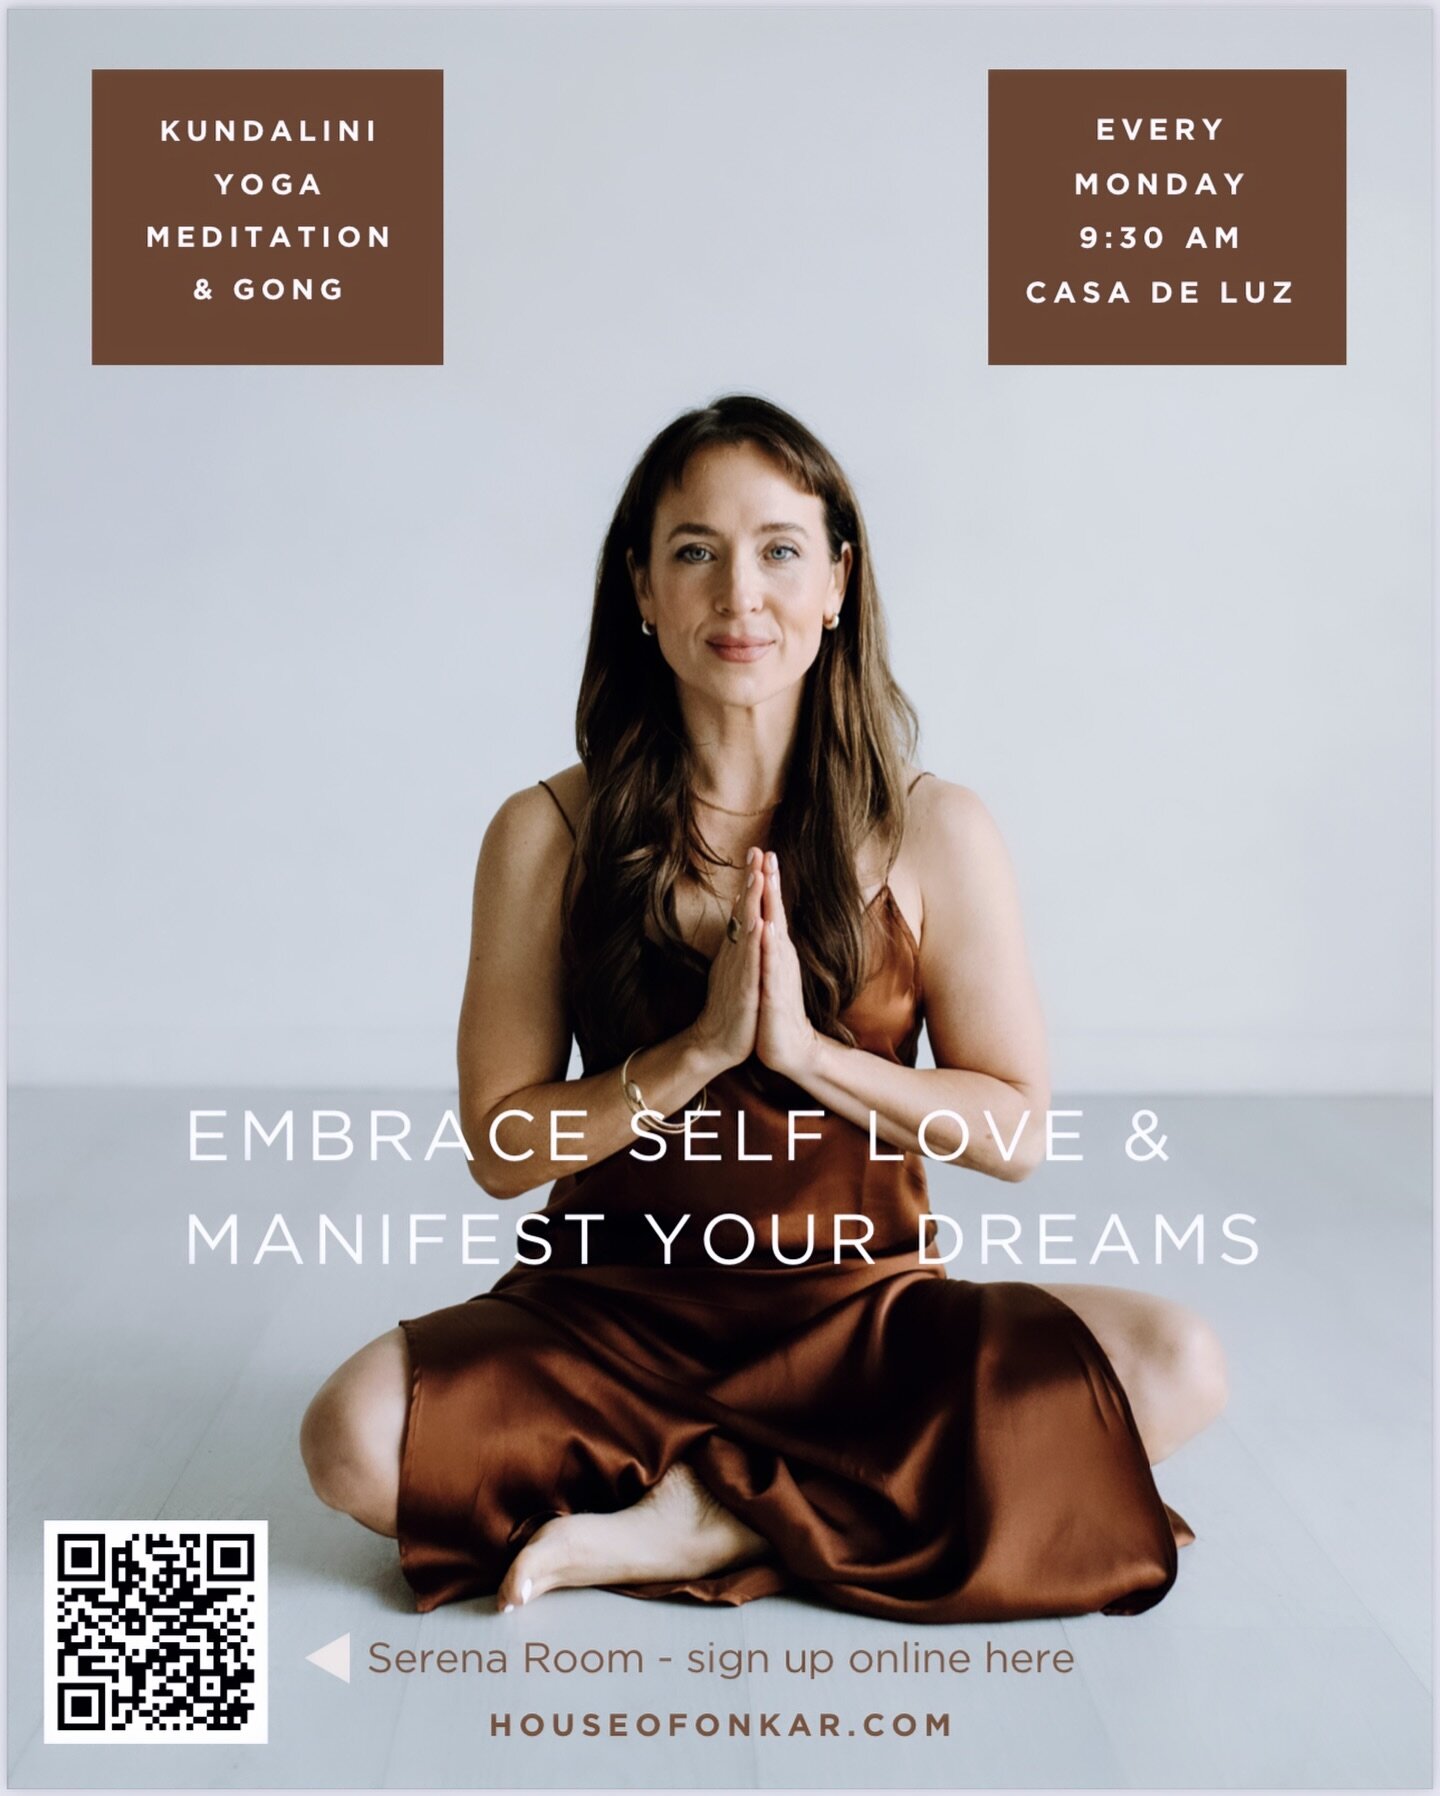 Austin IRL coming February 19 th! @casadeluz_atx 

For the last 16 years I have taught Kundalini yoga and meditation. I&rsquo;ve had so many transformations with this technology. As a women,  as a teacher, as practitioner, as a facilitator of healing